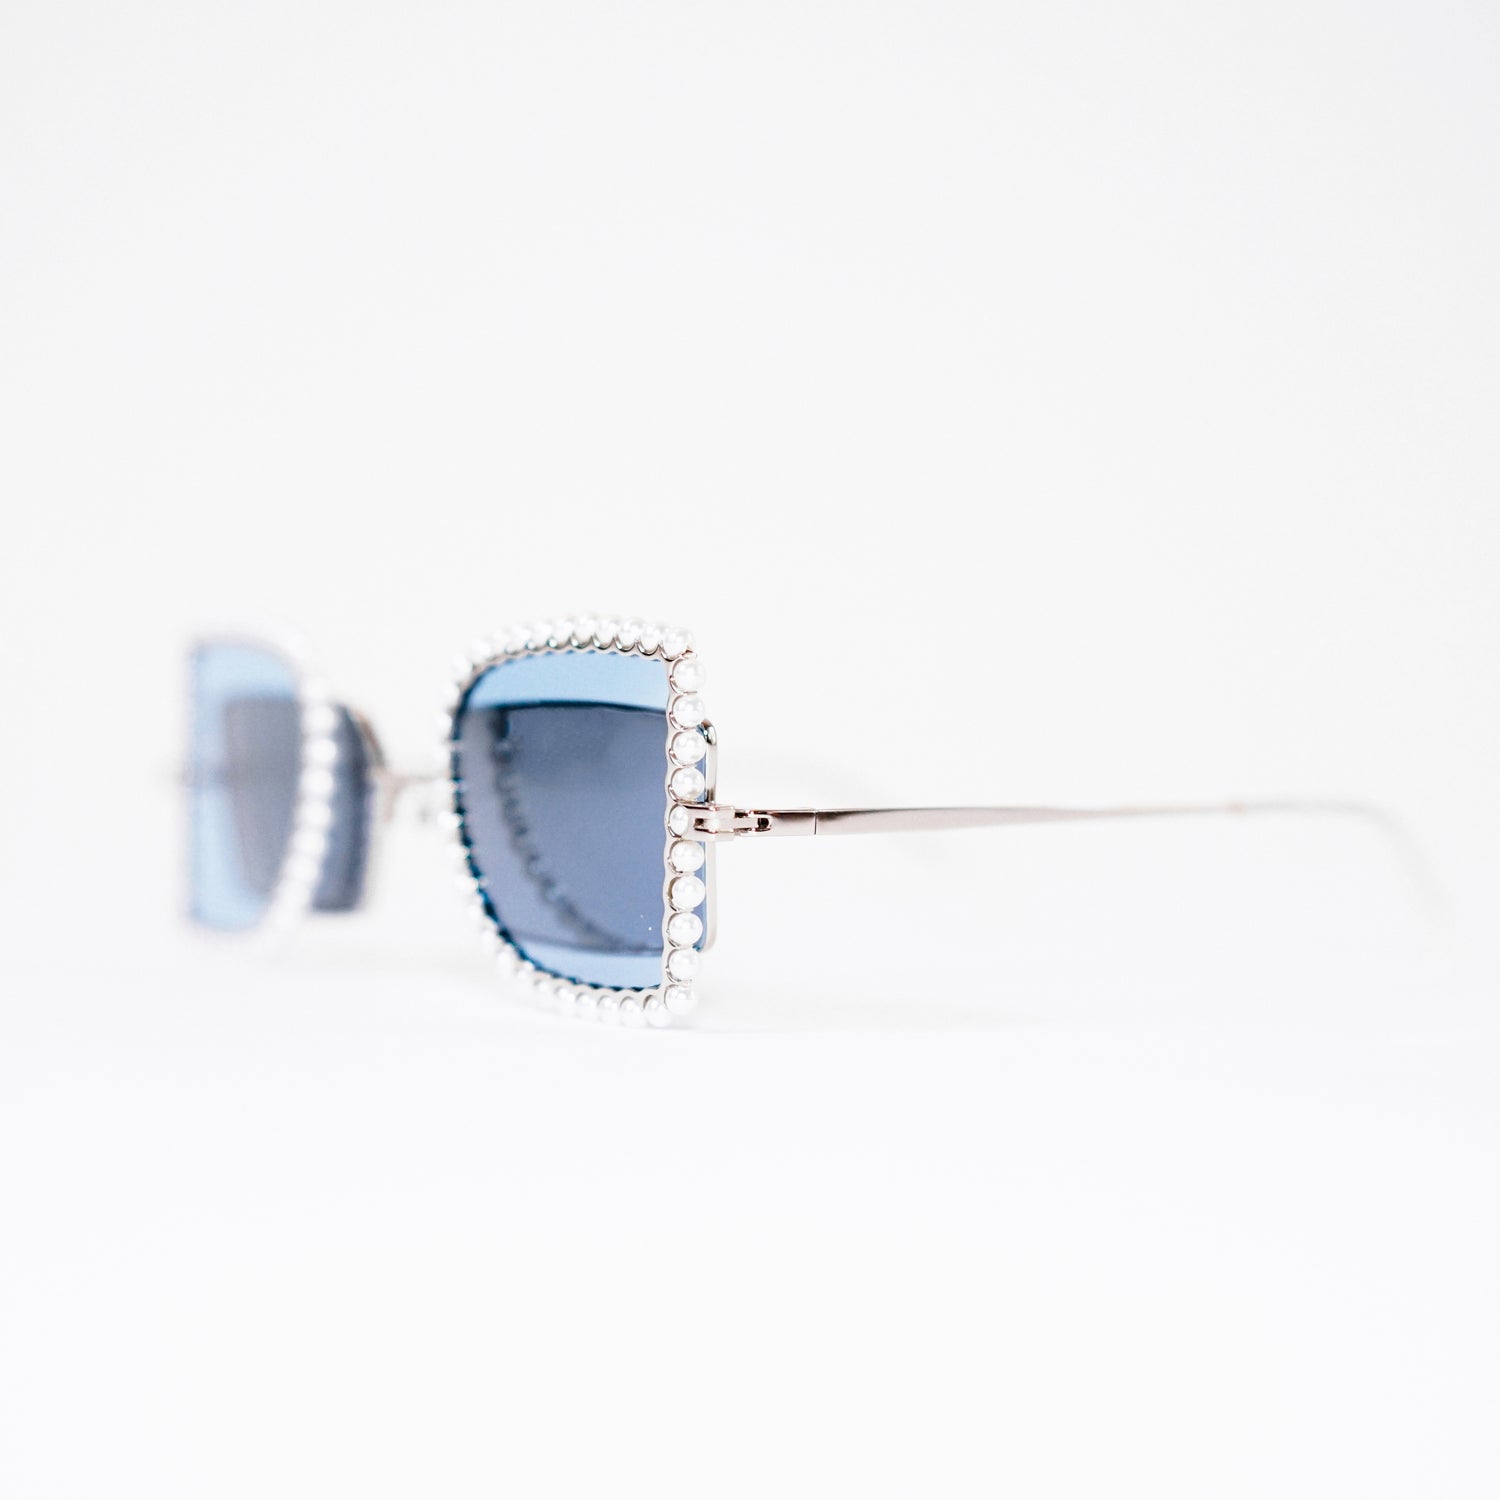 sunglasses with pearl rimmed window closed and blue polaroid lens 45 angled